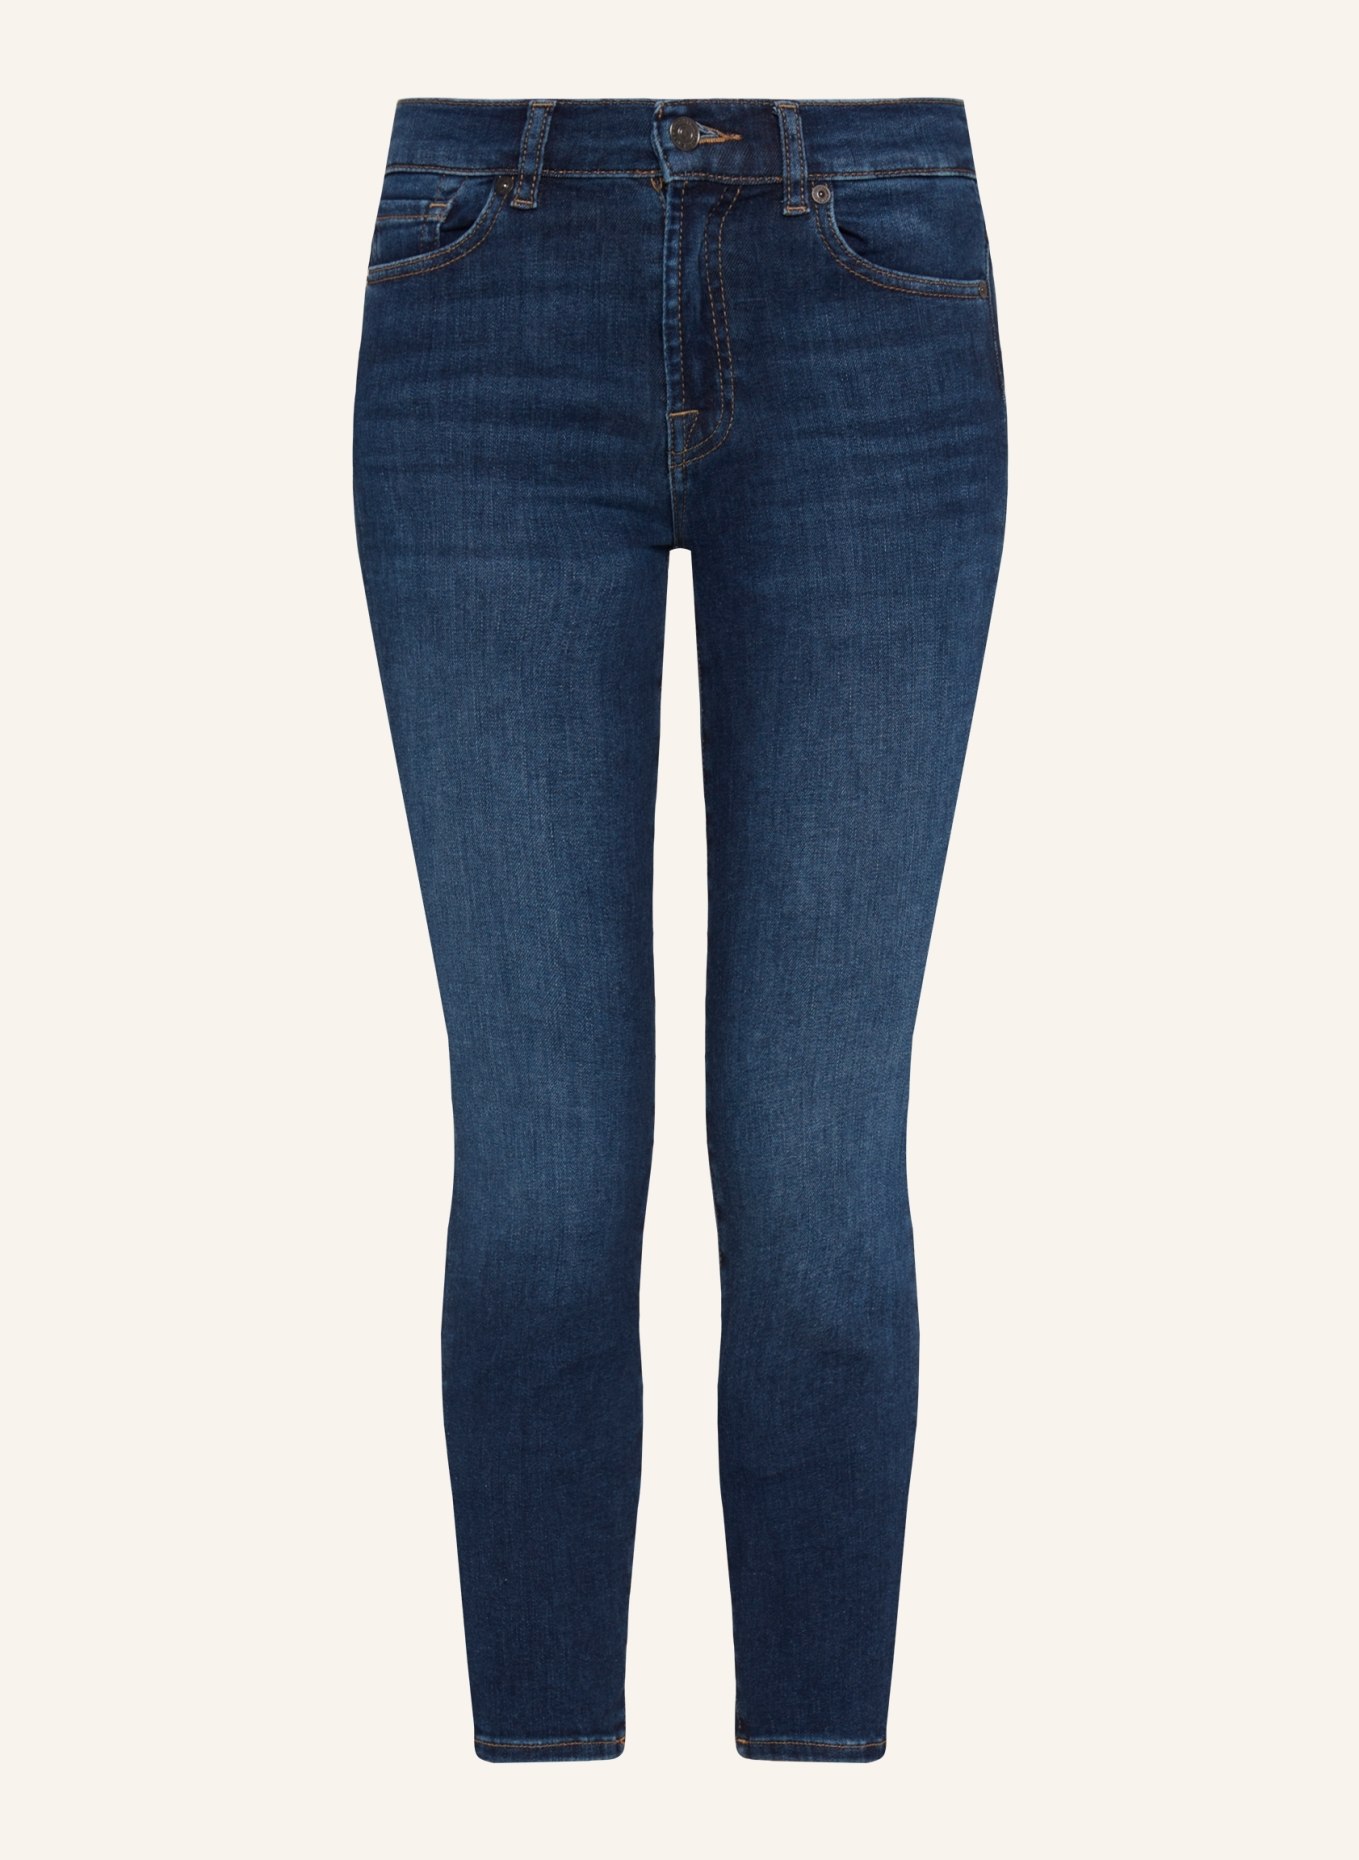 7 for all mankind Jeans ROXANNE ANKLE Slim Fit, Farbe: BLAU (Bild 1)